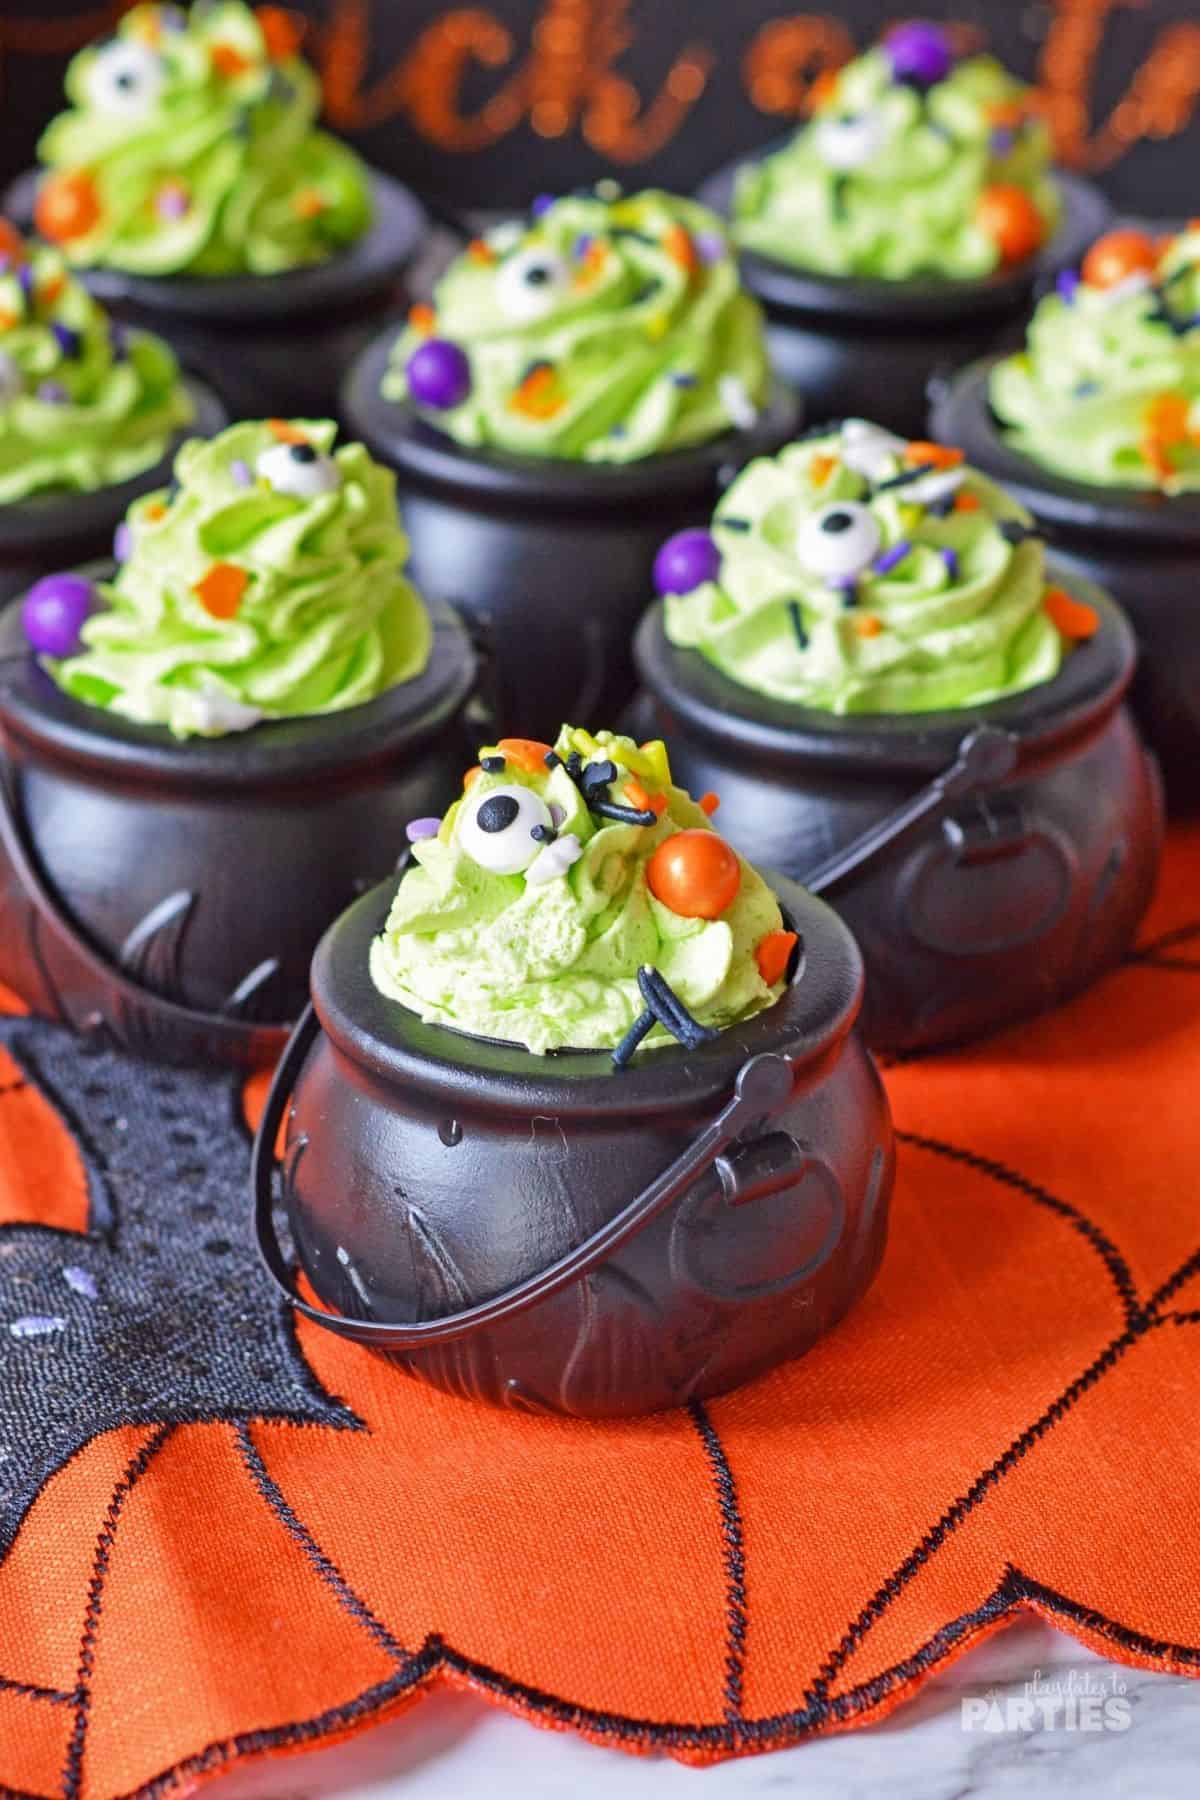 Pudding snacks in black plastic pots with green whipped cream and sprinkles.